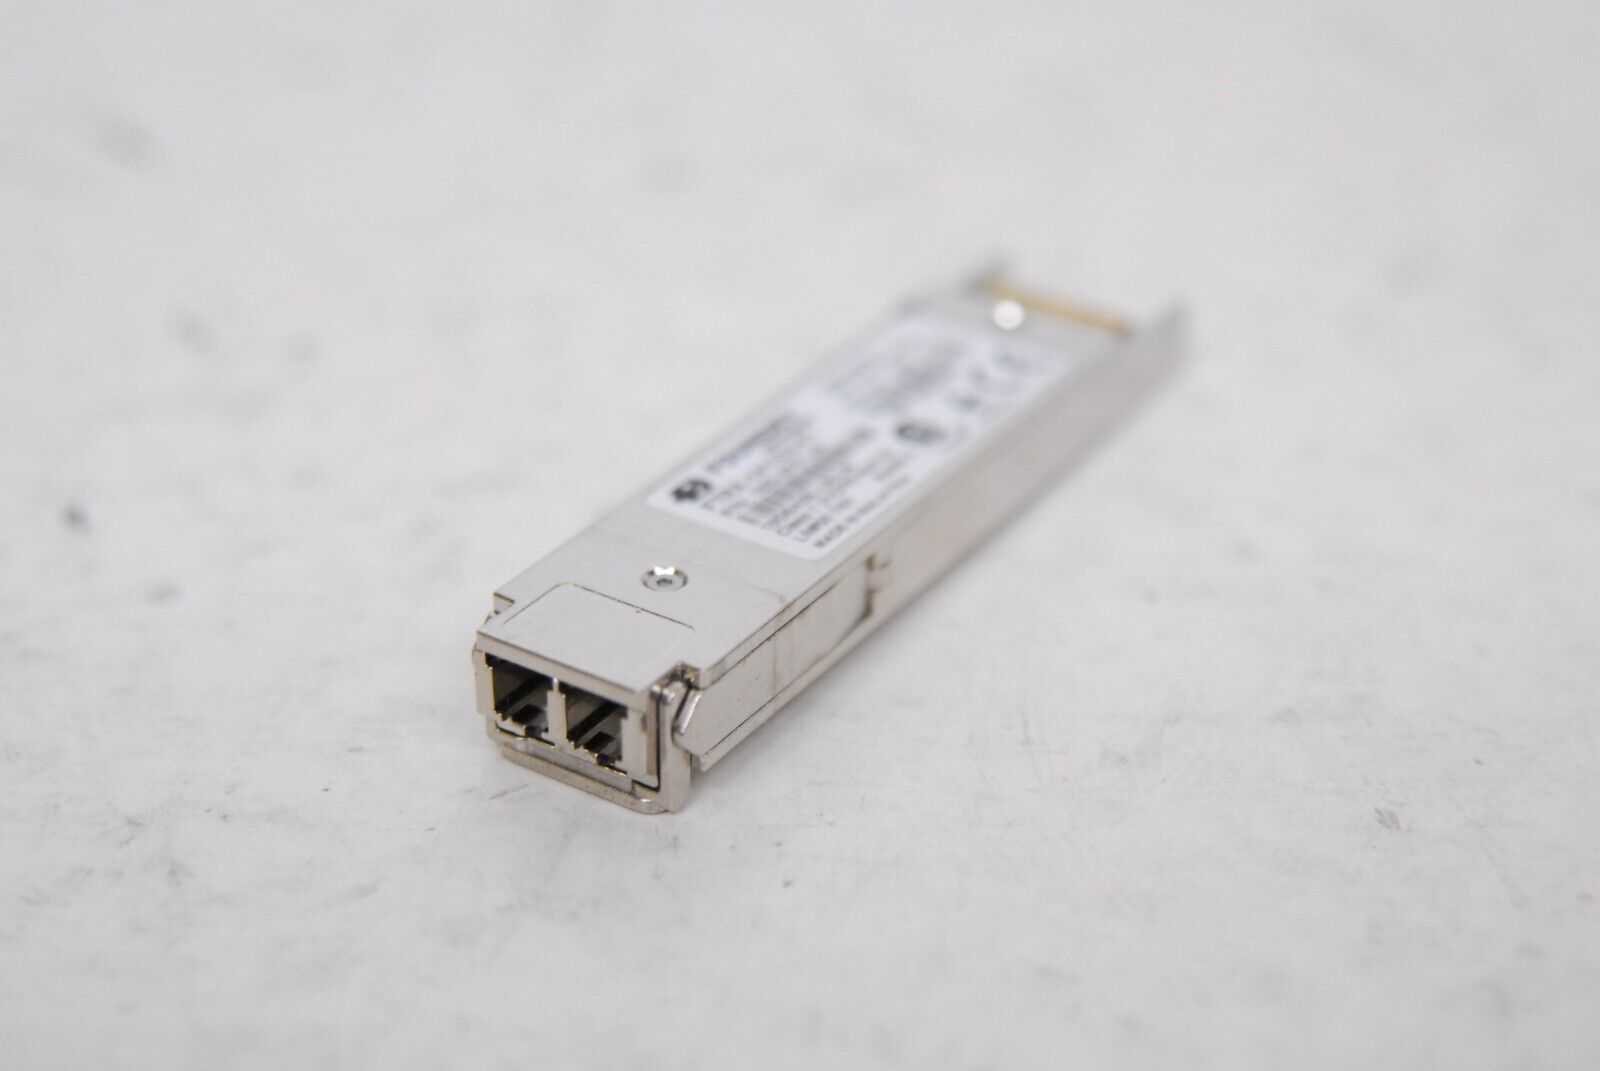 Foundry Networks 10G-XFP-LR XFP Optical Transceiver Module 1310nm